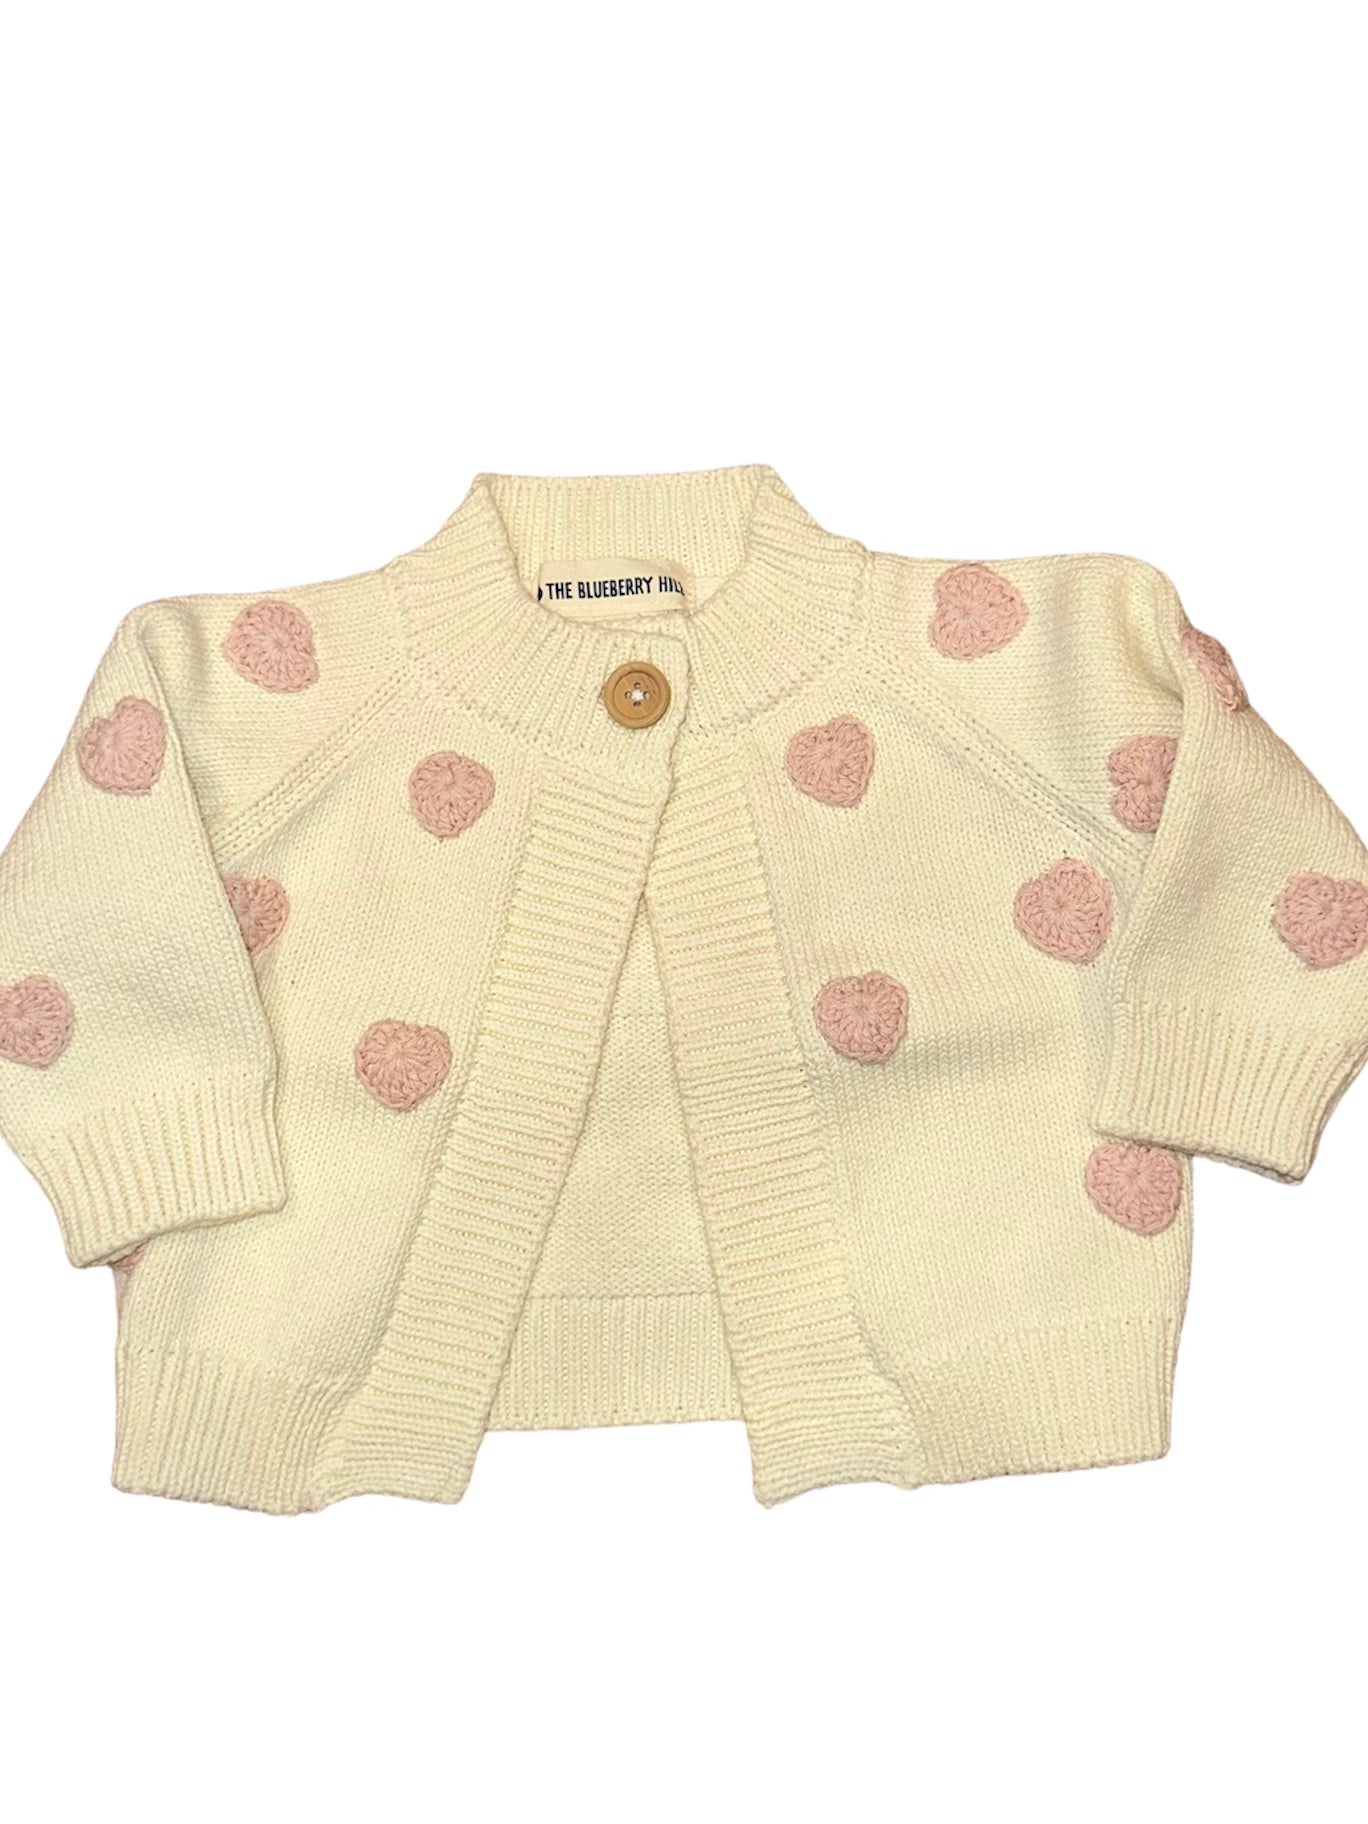 The Blueberry Hill Heart Sweater